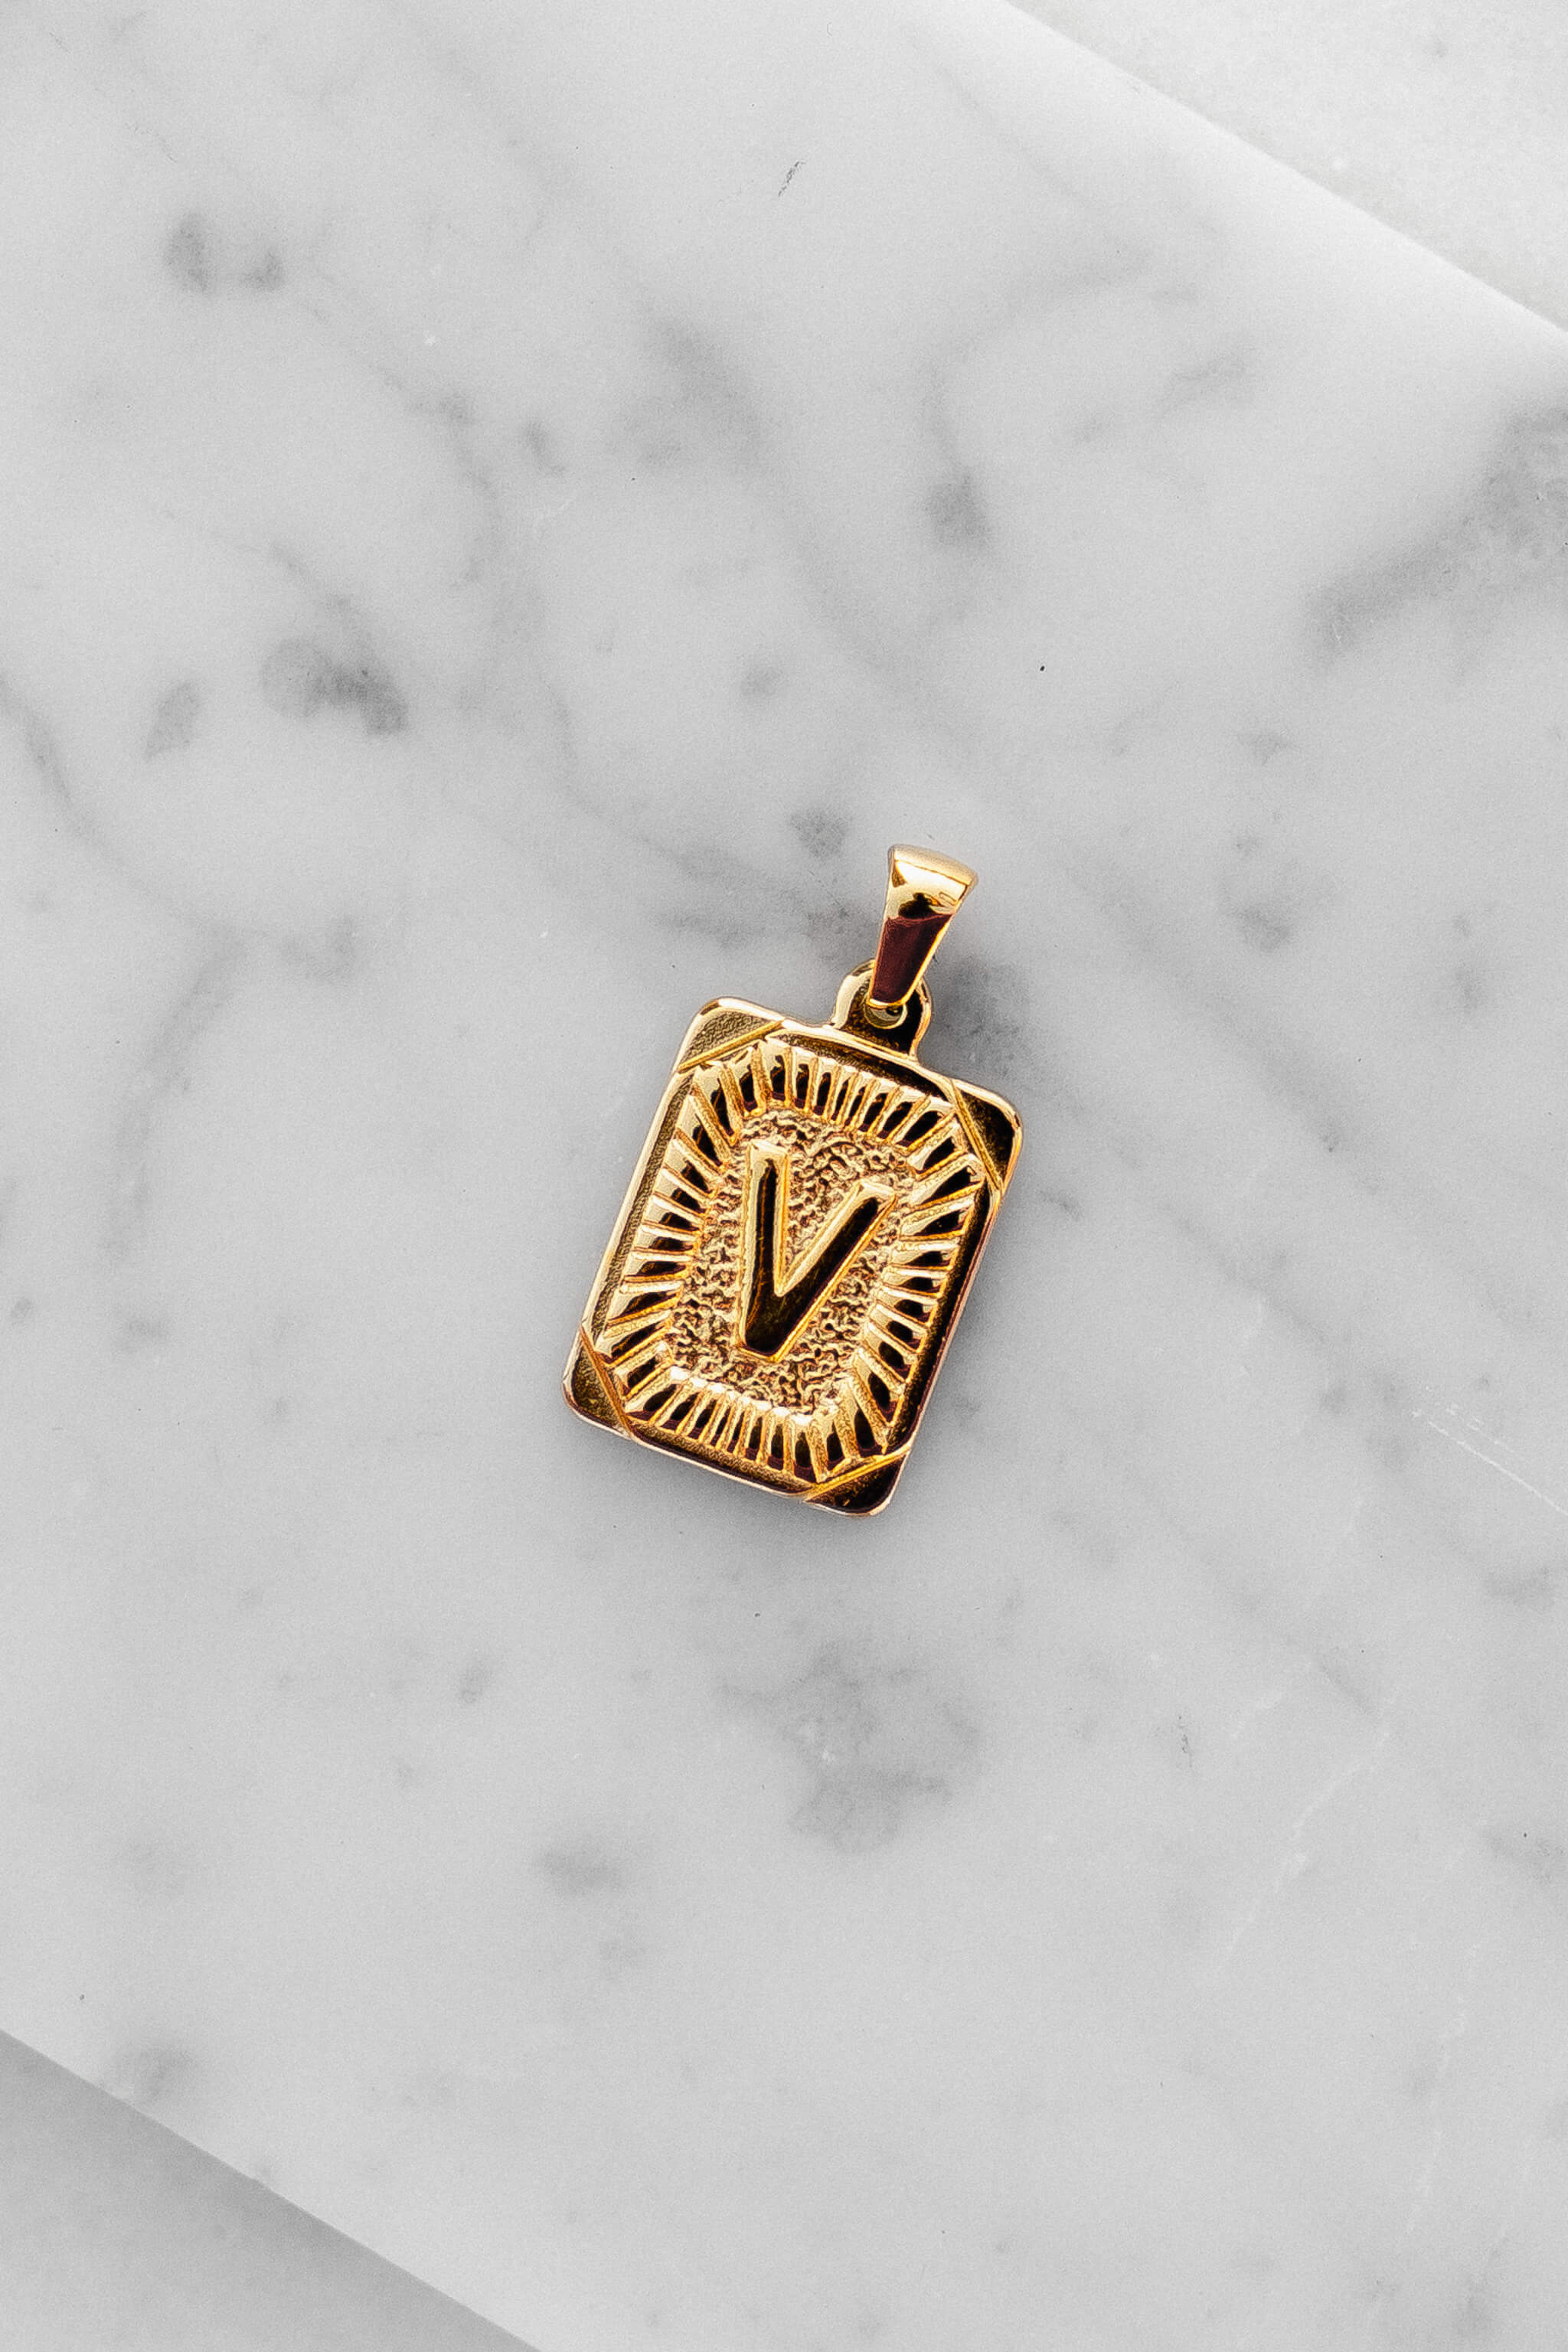 Gold Monogram Letter "V" Charm laying on a marble